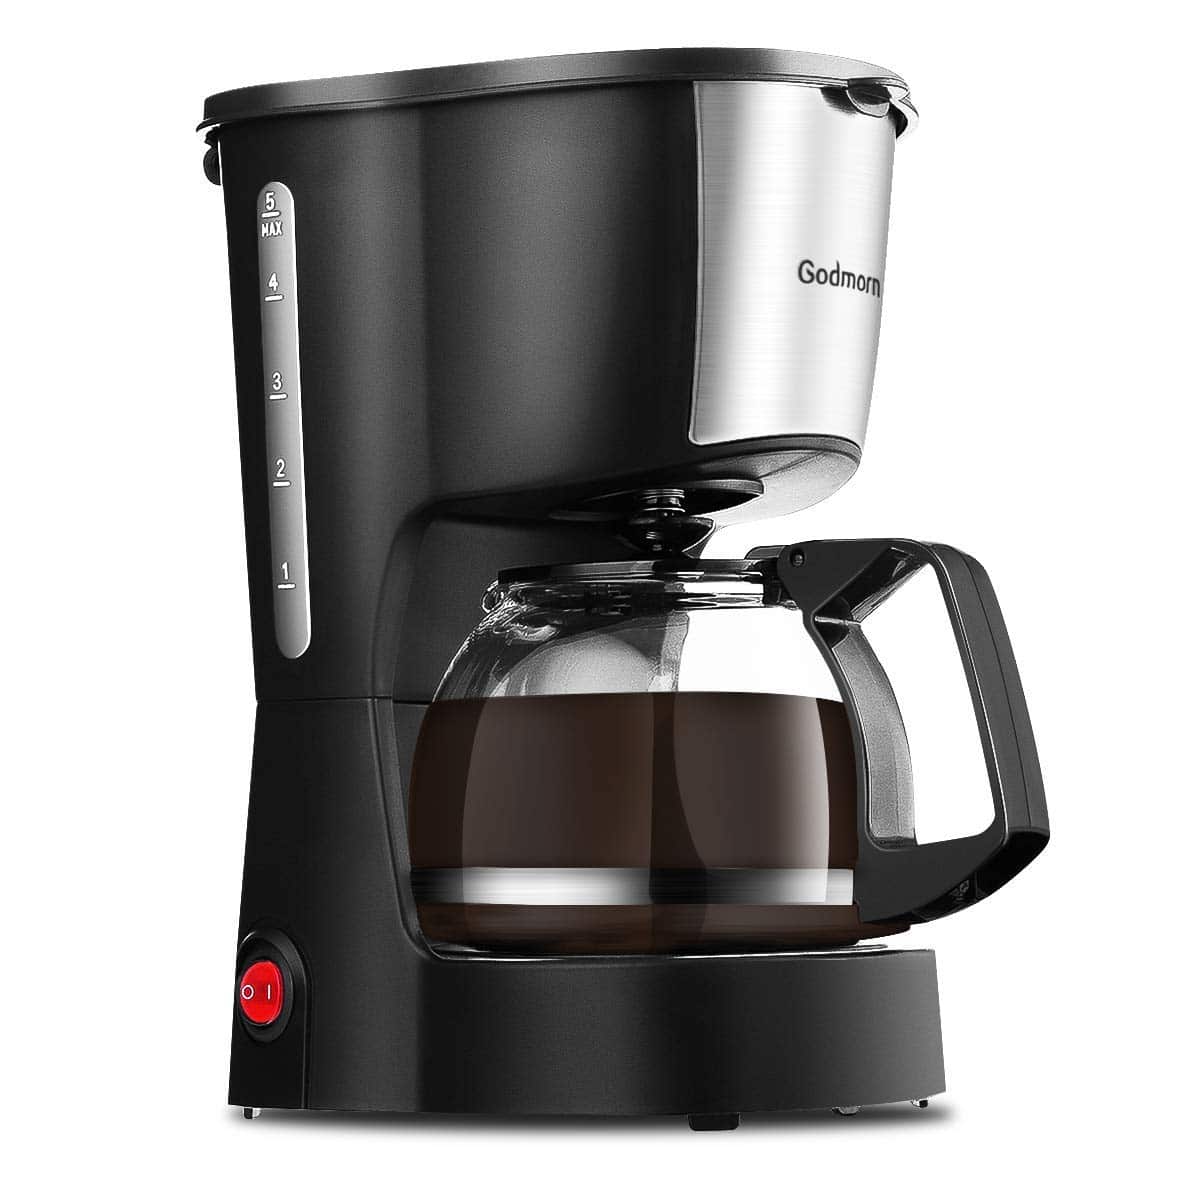 Top 10 Best Drip Coffee Makers In 2021 Review